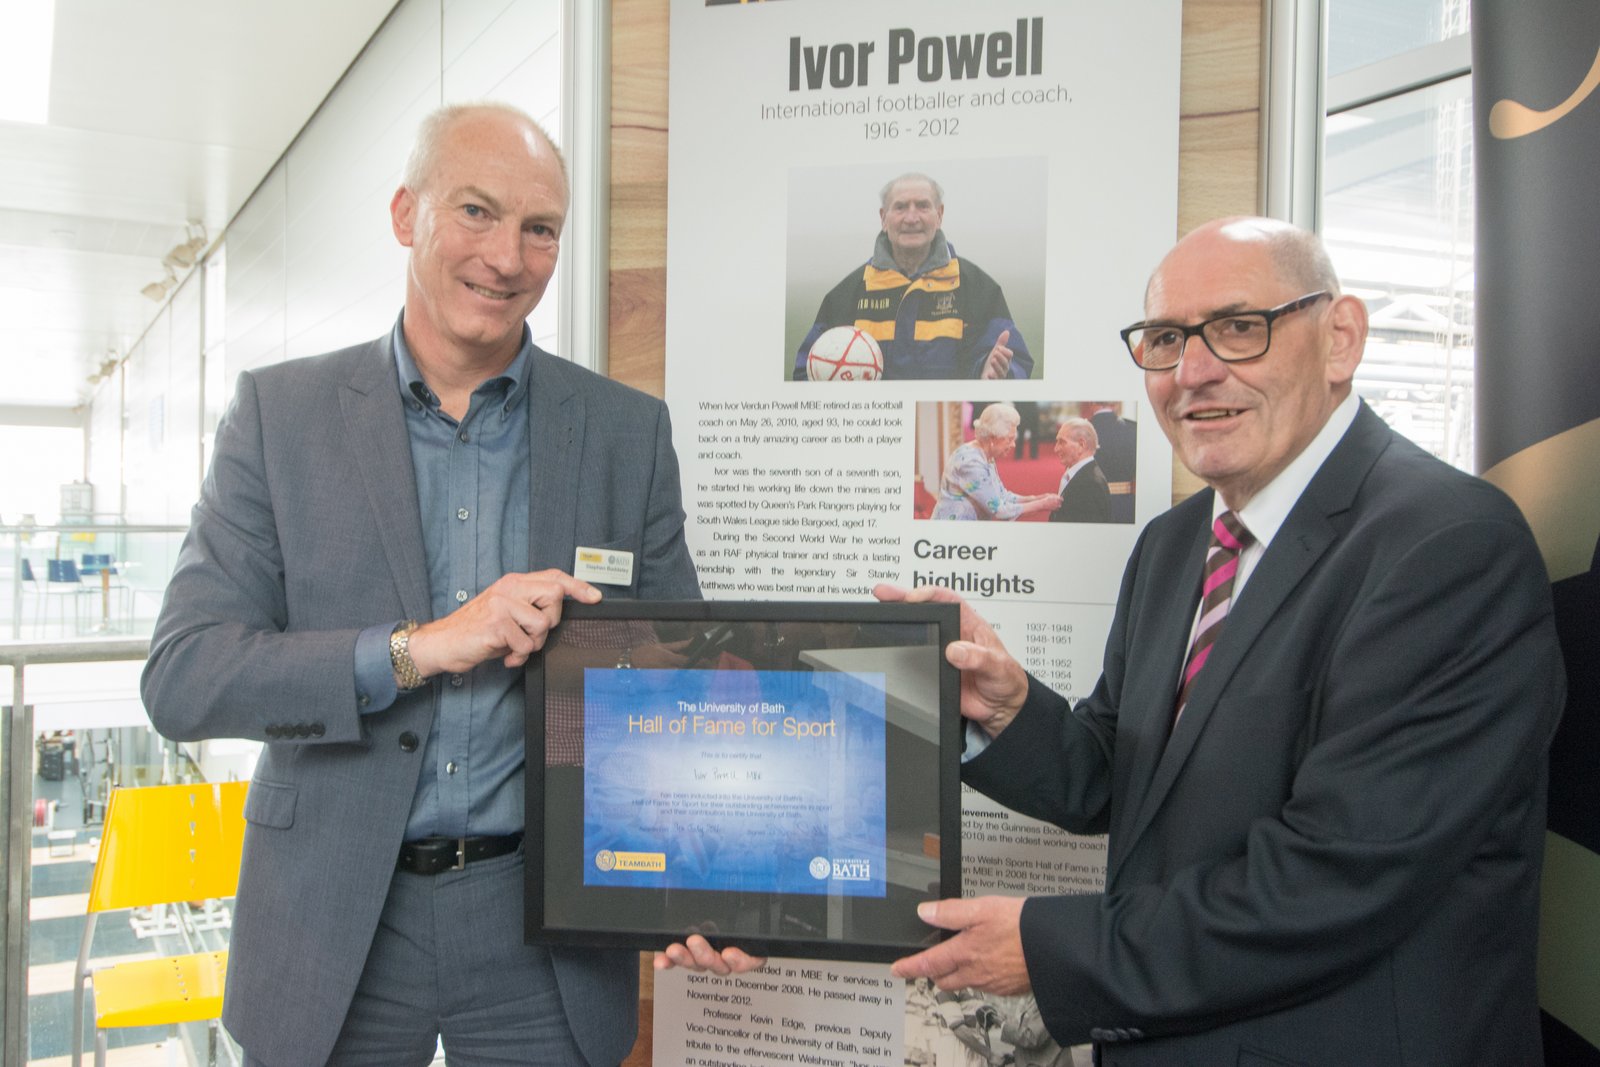 Huge turn out to celebrate Ivor Powell at Team Bath